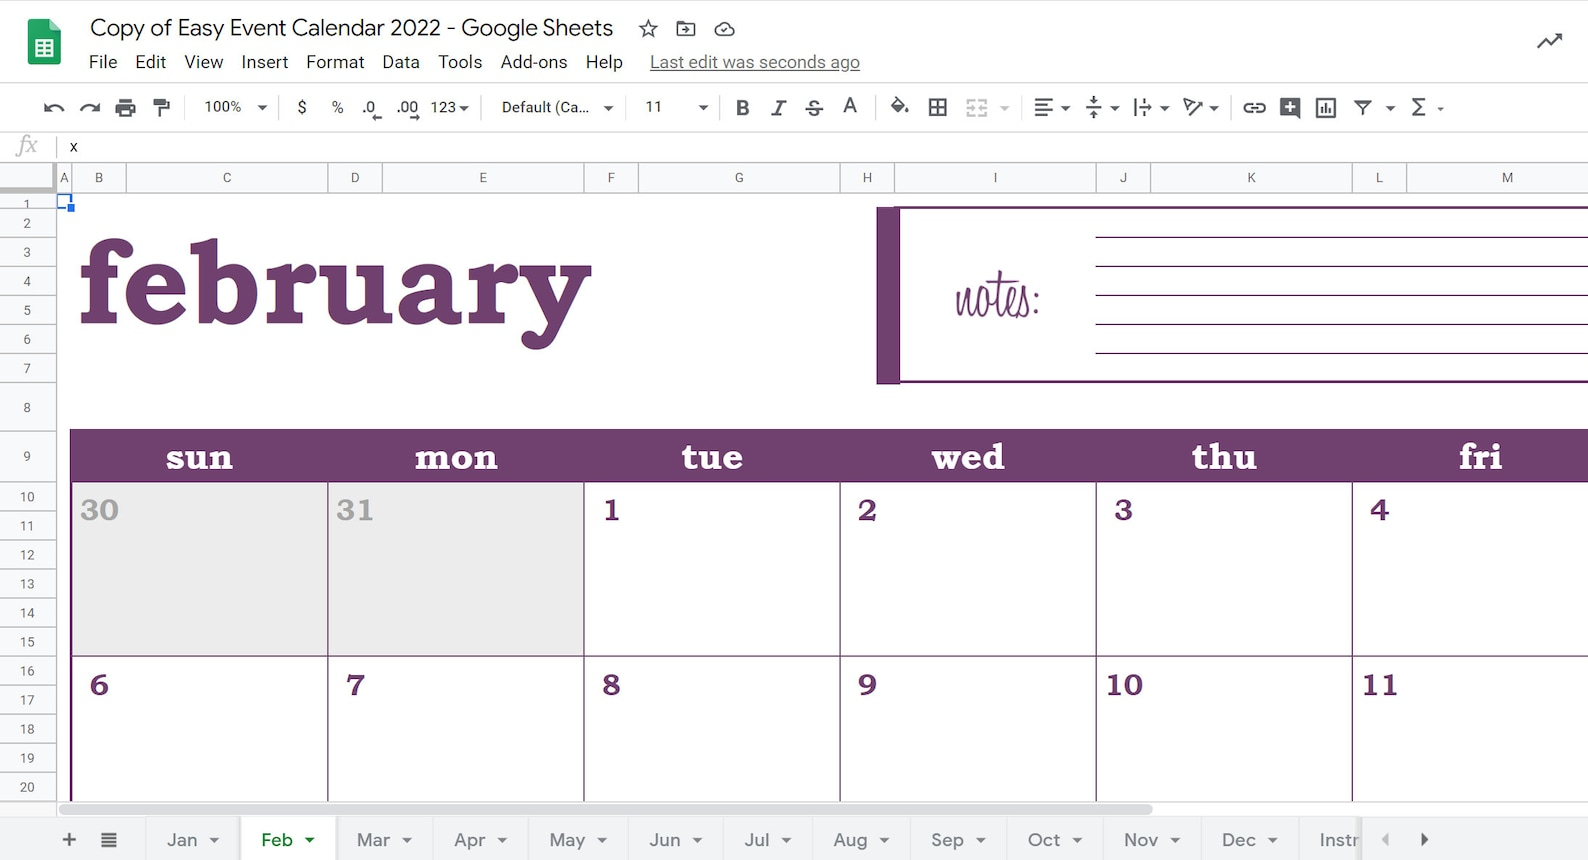 Easy Event Calendar 2022 Google Sheets Template Printable | Etsy within Calendrier Google Sheets 2022